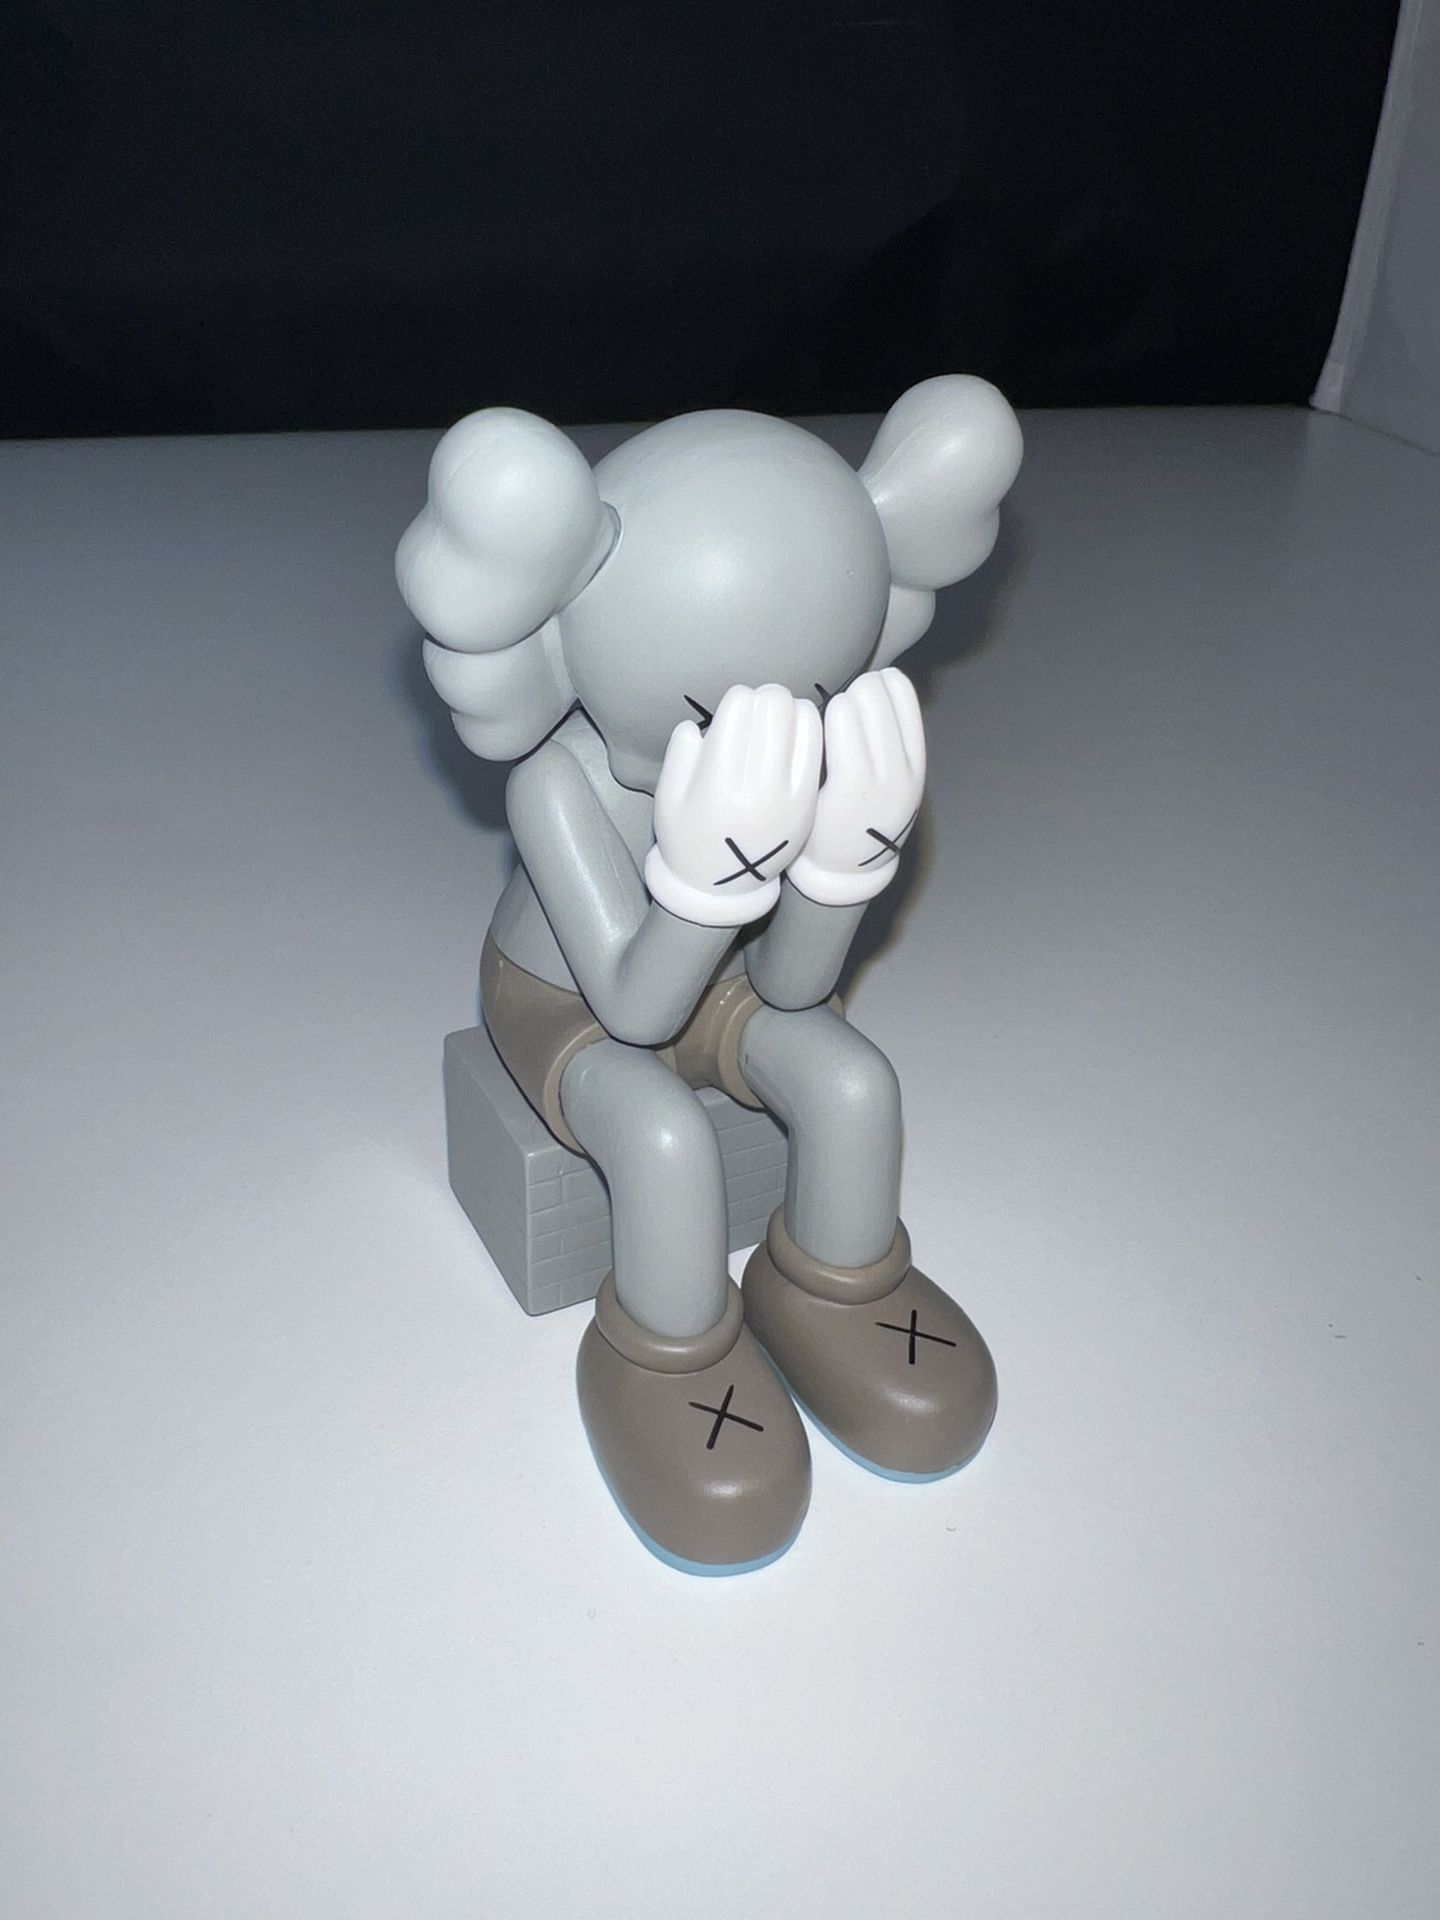 KAWS Inspired Sculpture Bear Figure Collectibles Building Blocks Sitting HAND in Face Decoration, Model Toy Unique Gift Hypebeast - Gray